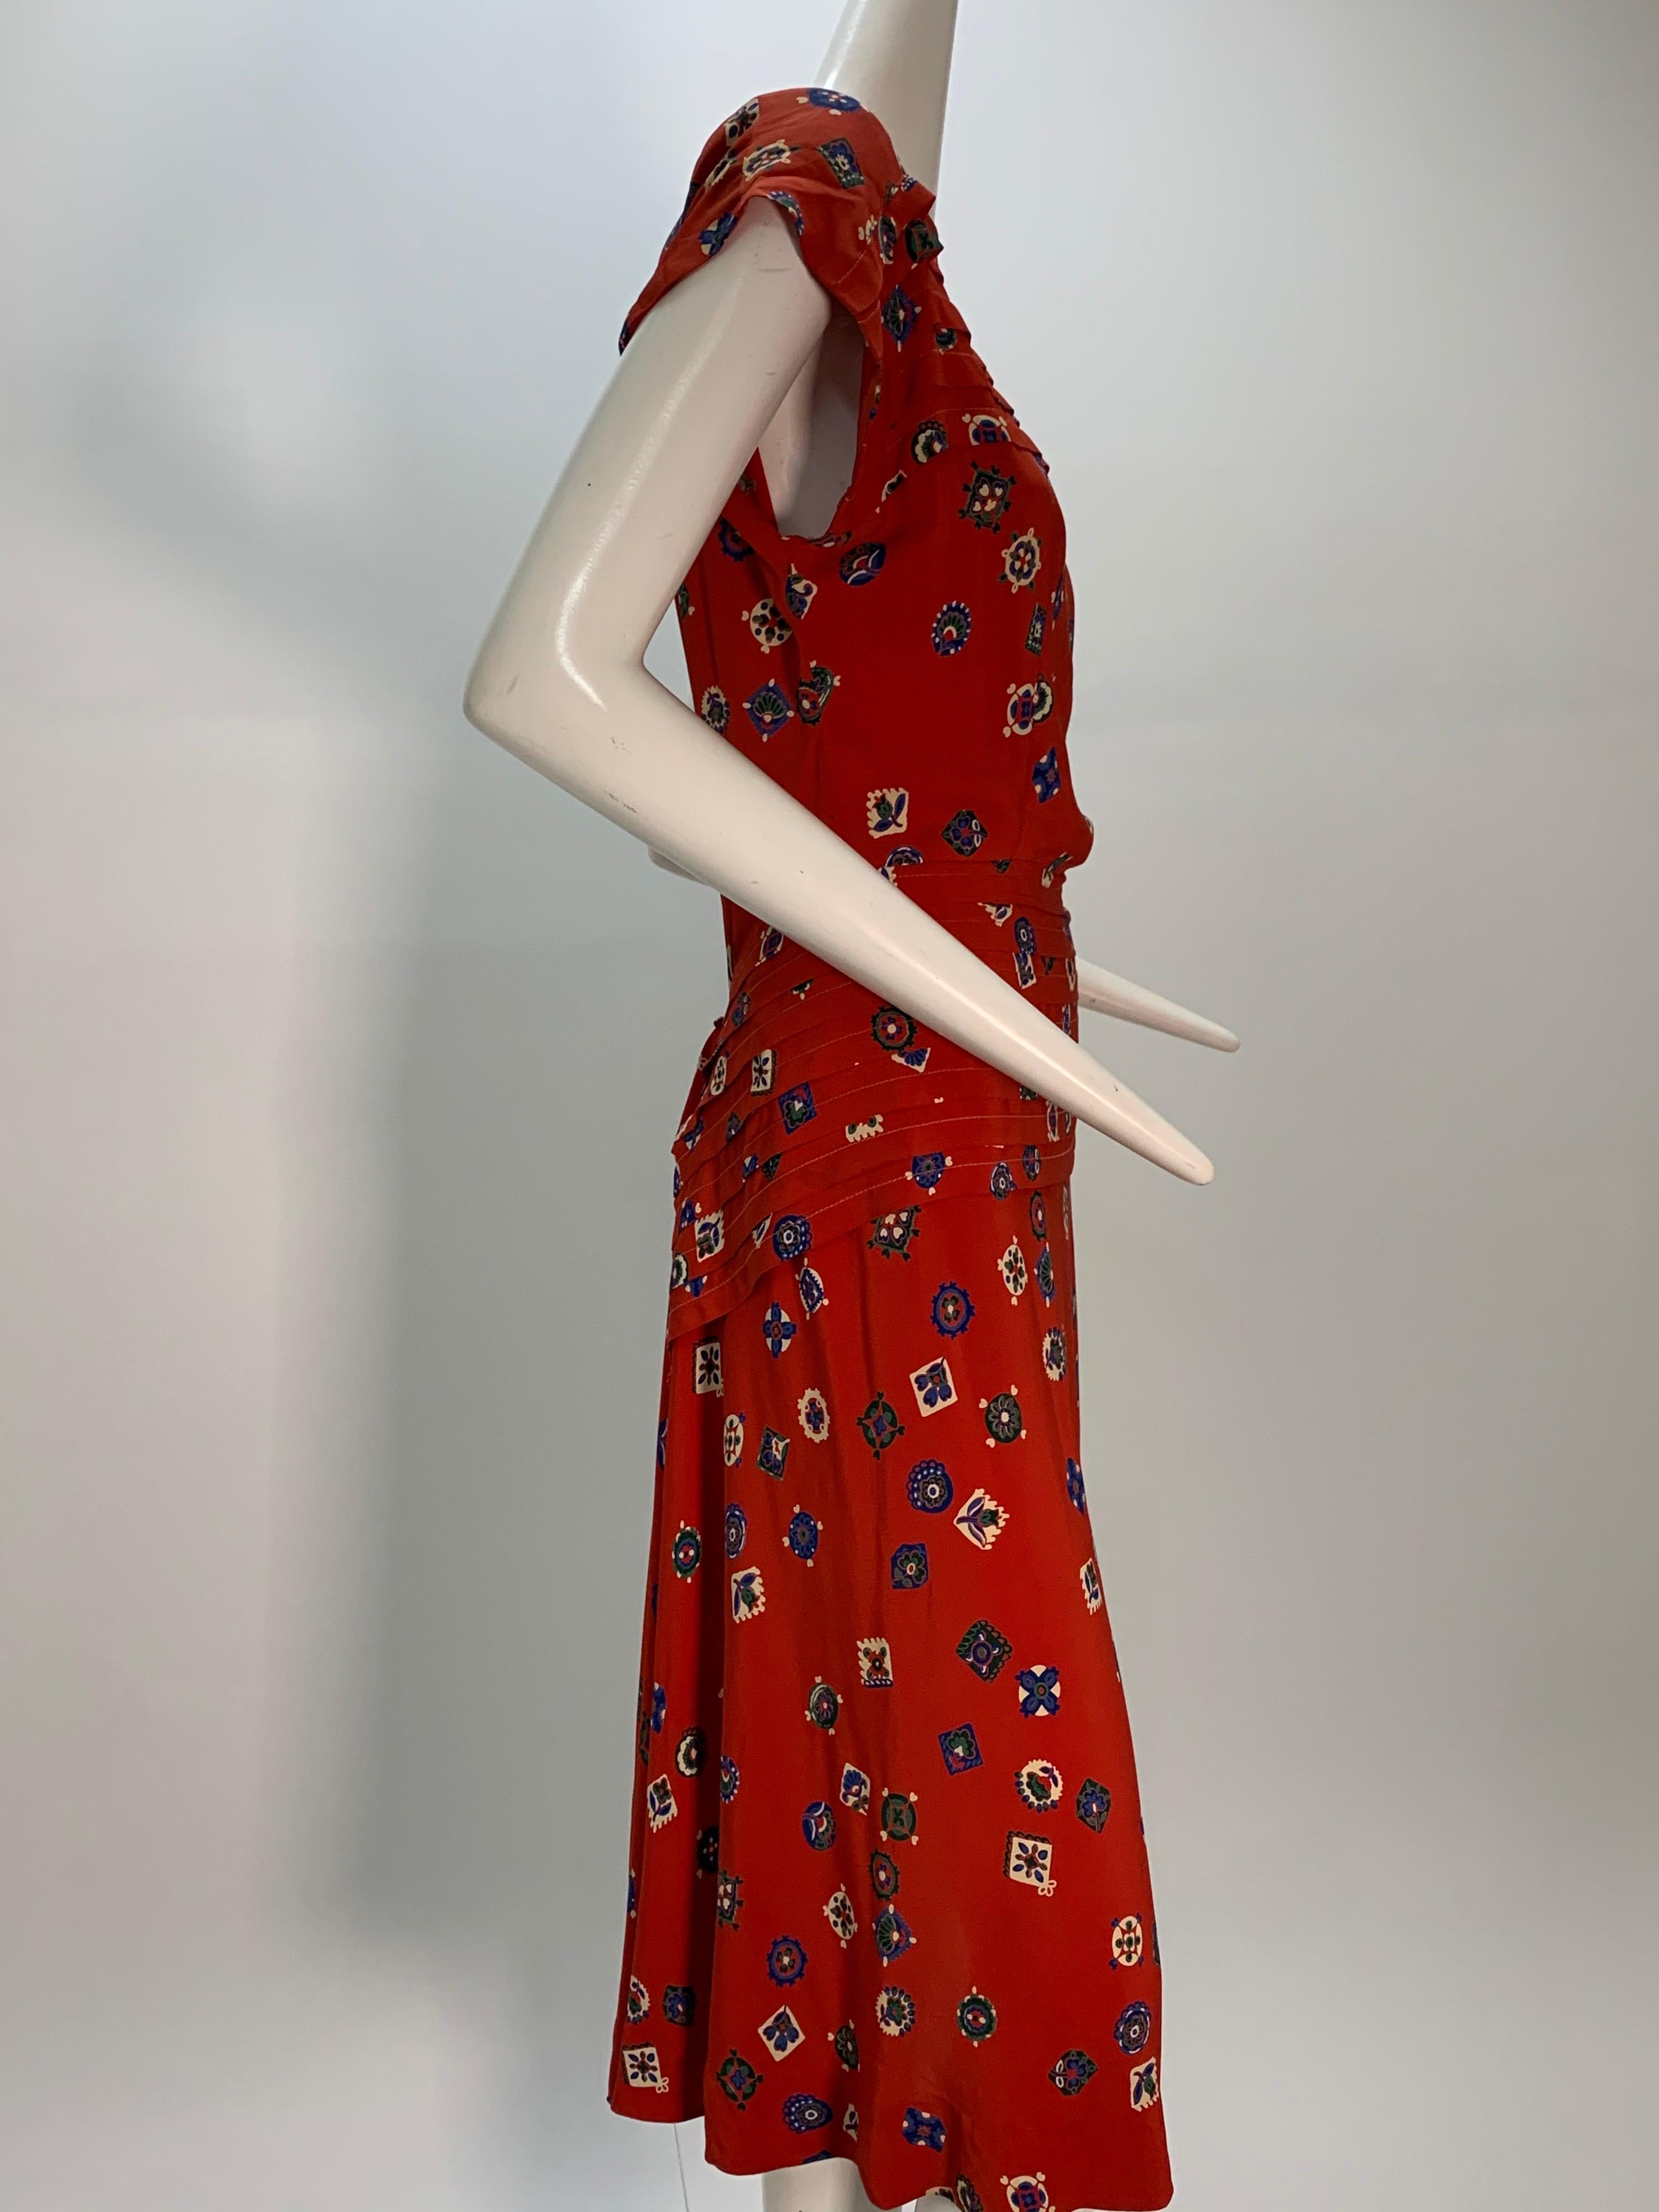 1940s Red Rayon Print Crepe Swing Dress With Pleated Peplum and Shoulders In Excellent Condition For Sale In Gresham, OR